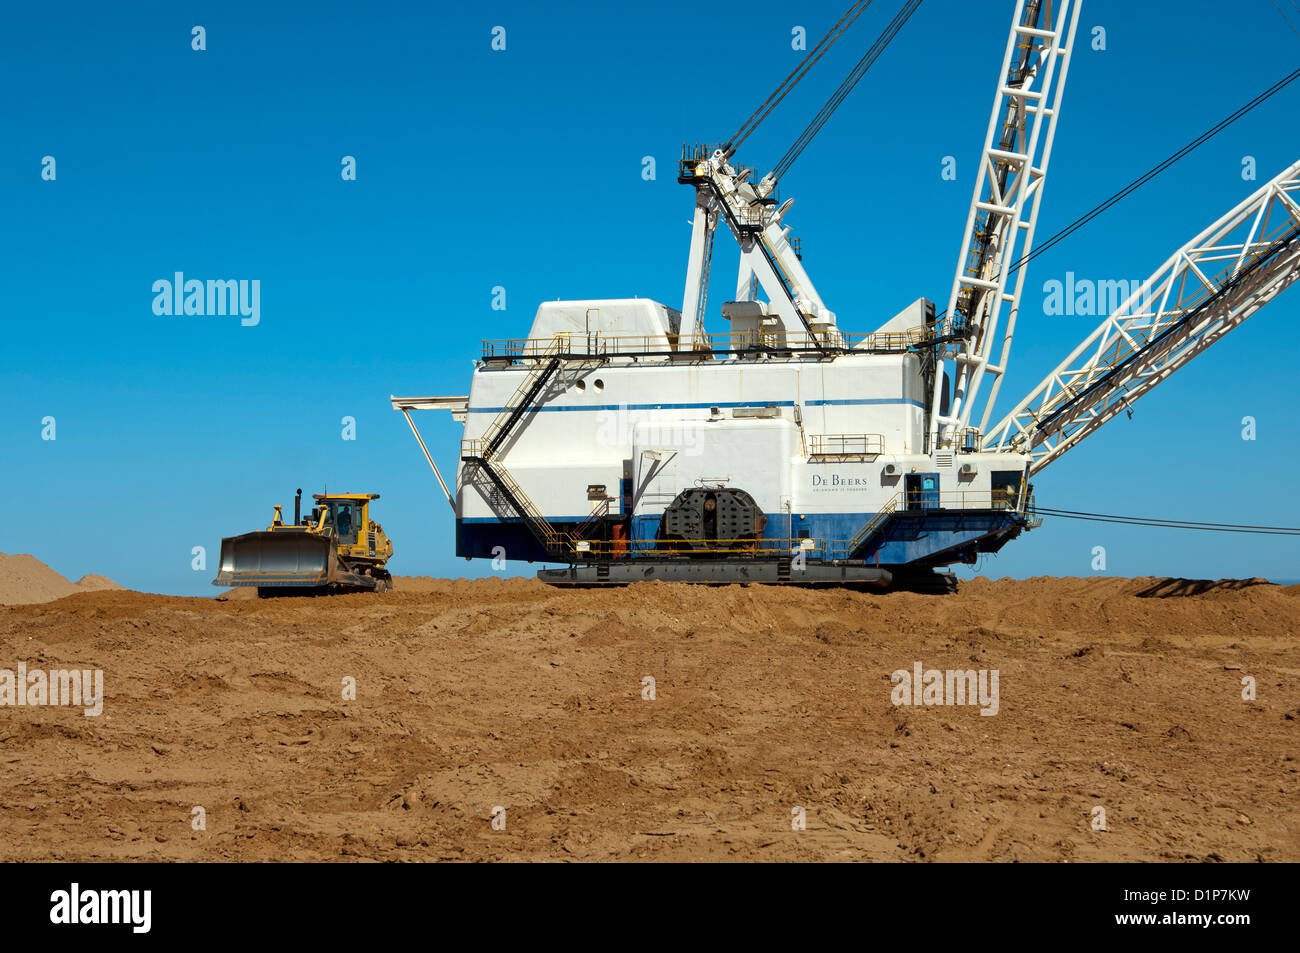 Comparision in size between a Dragline excavator and a bulldozer, De Beers diamond mine, Kleinzee, South Africa Stock Photo